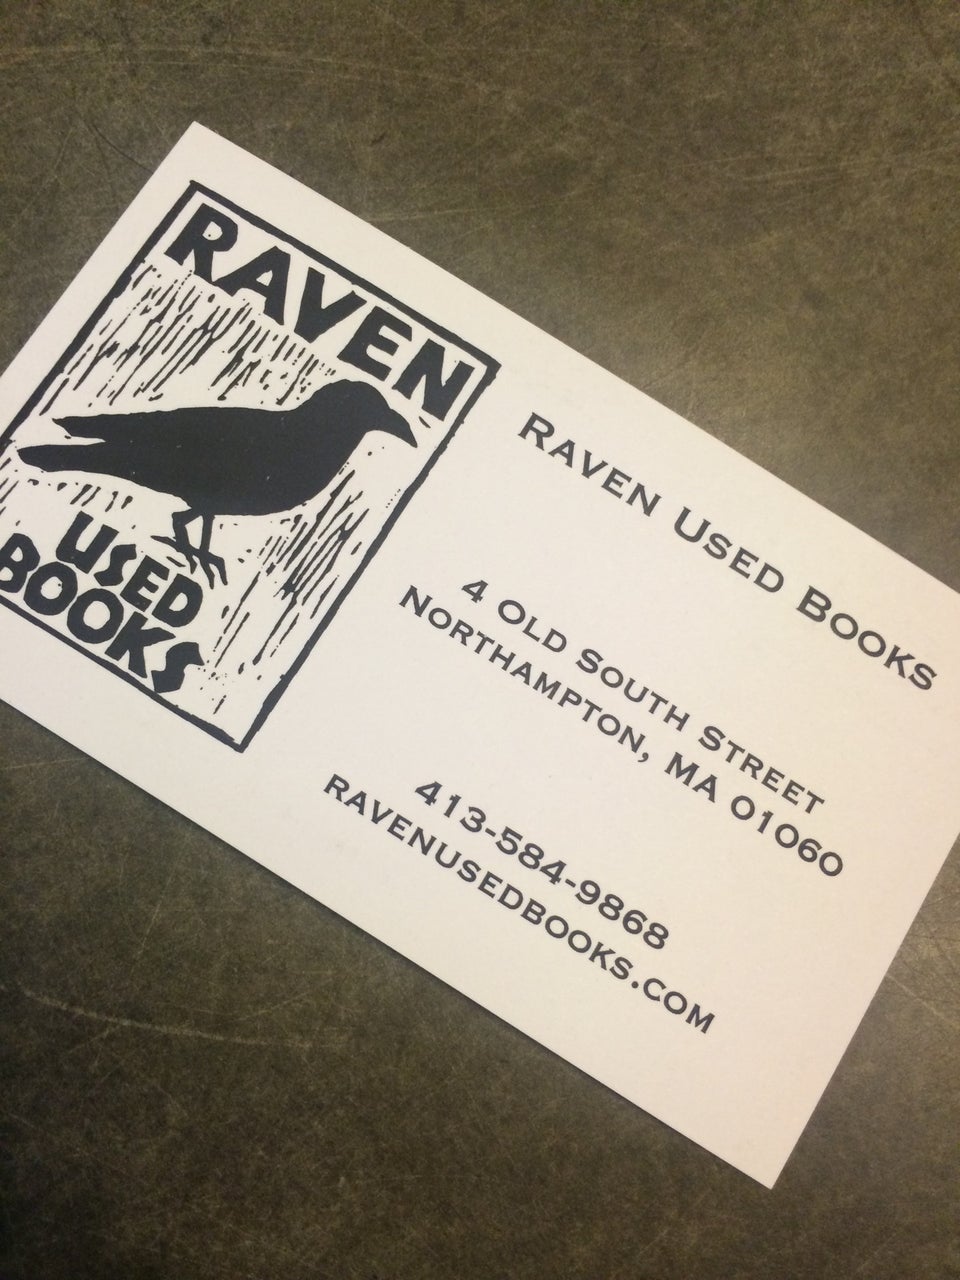 Photo of Raven Used Book Shop